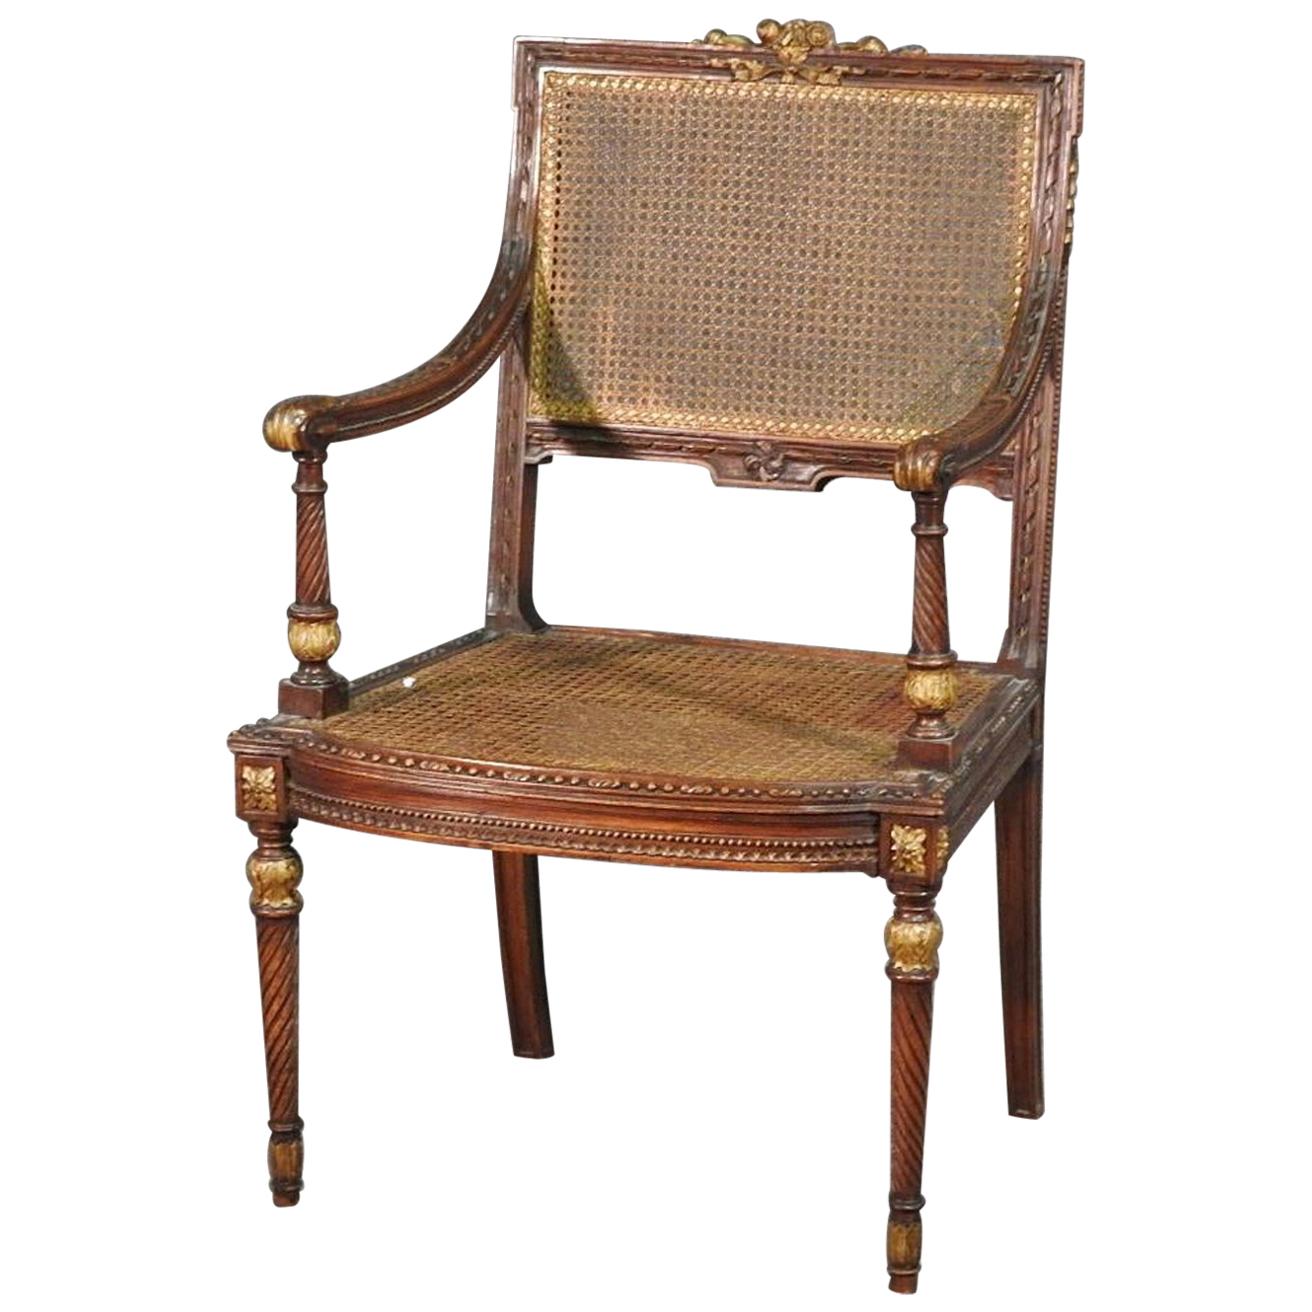 Carved French Louis XVI Cane Back and Seat Gilded Walnut Fauteuil Armchair